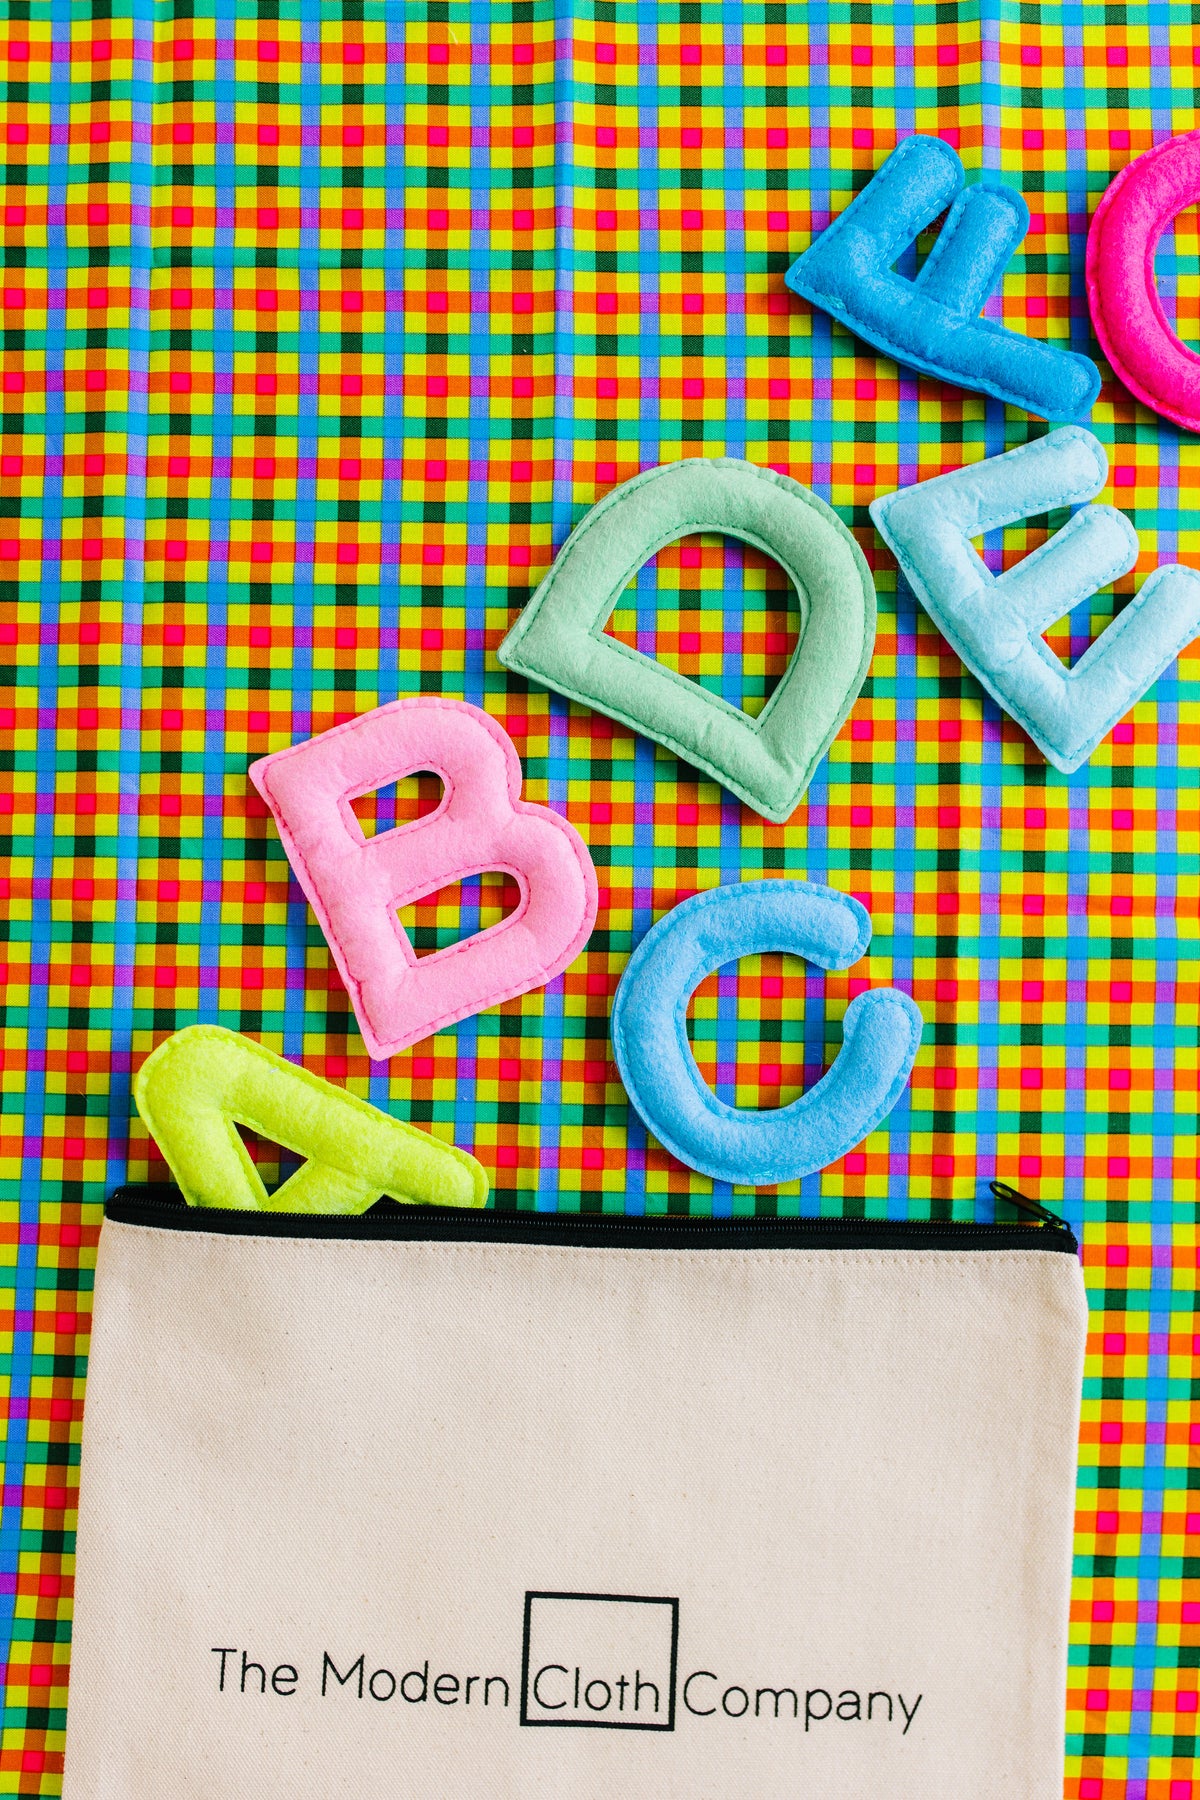 ABC Felt Letters - Learning Toy